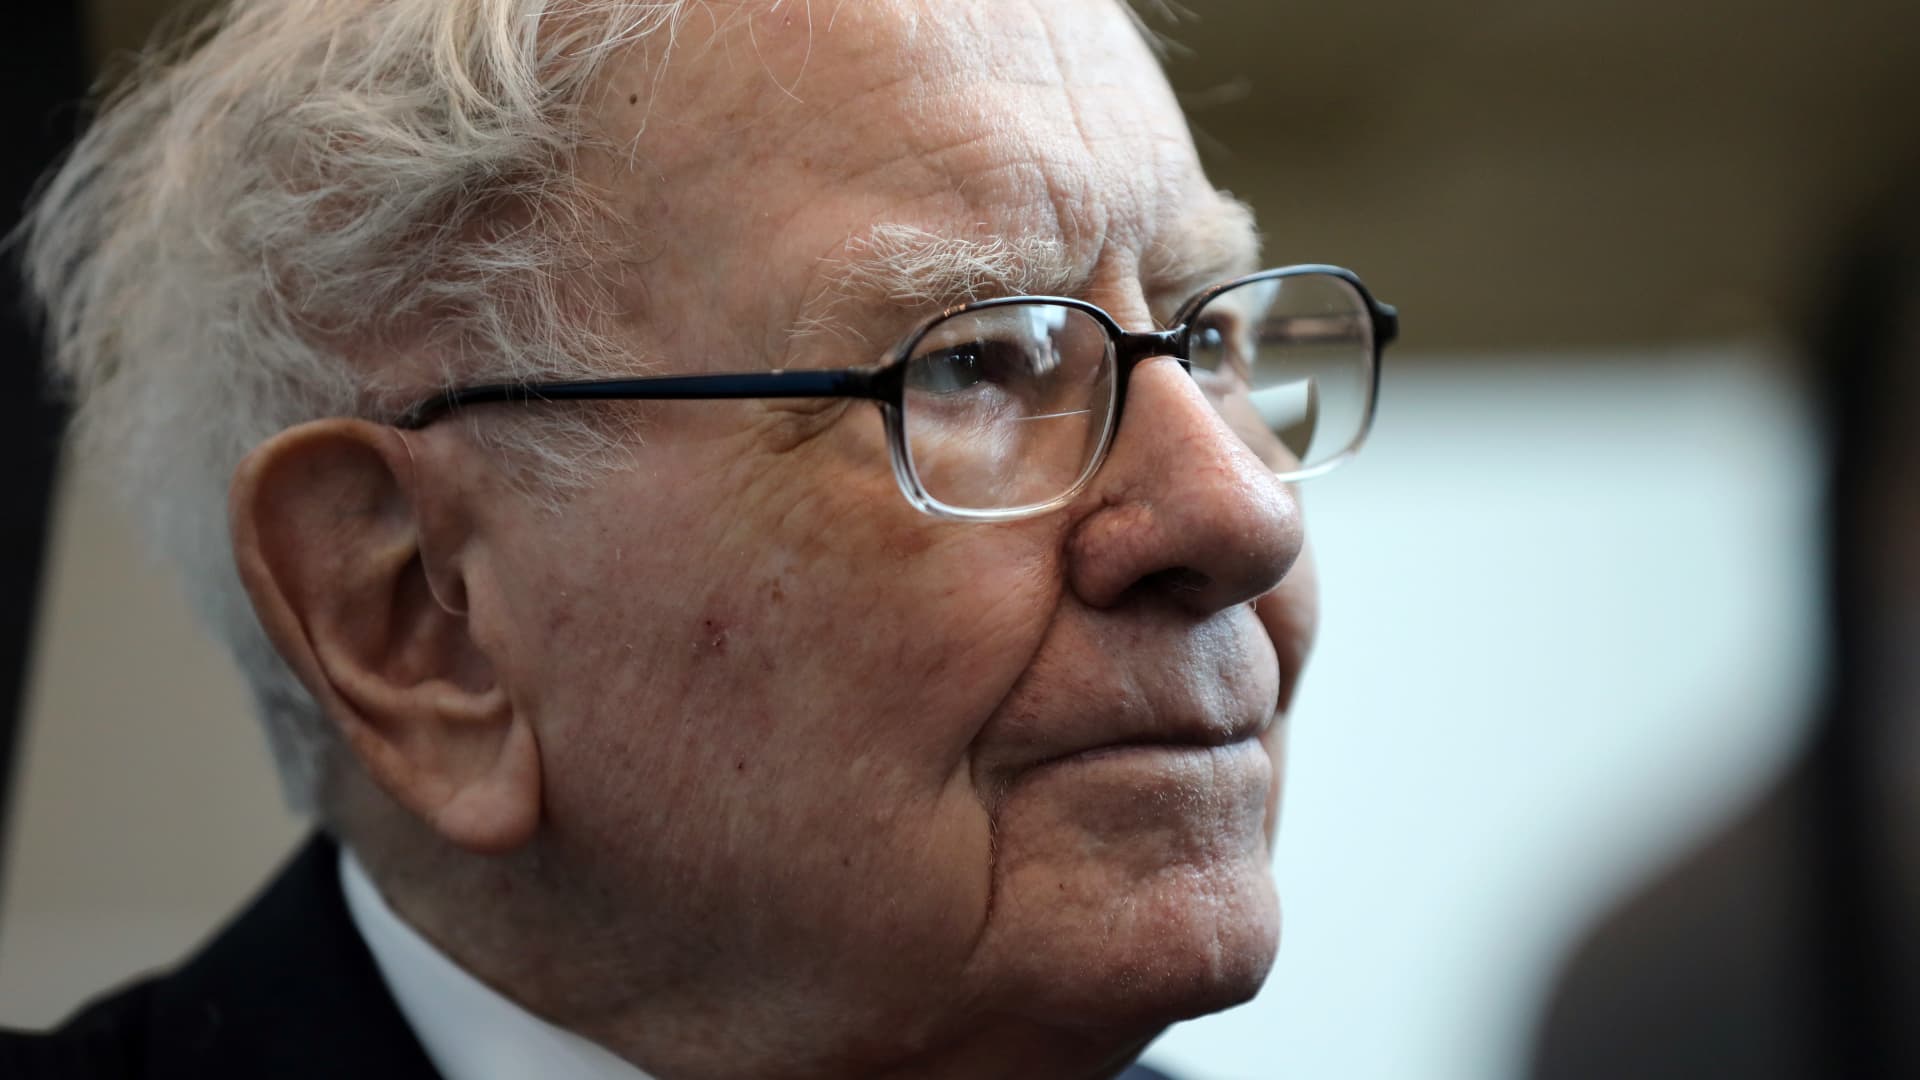 New minimum tax could hit Berkshire Hathaway and Amazon hardest, study shows